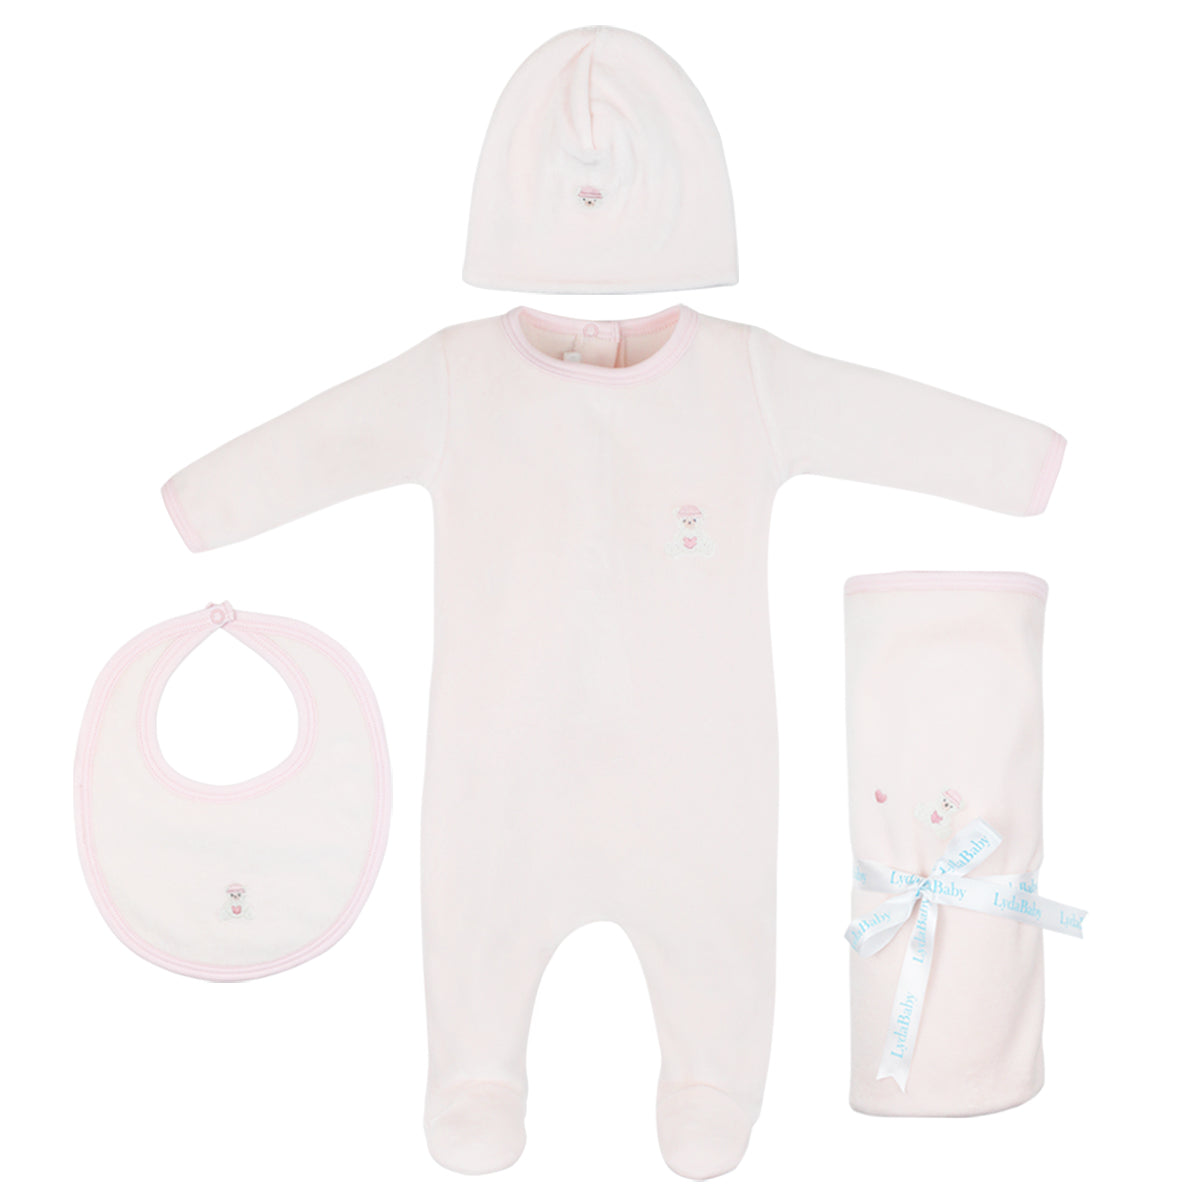 VELOUR LOVE TEDDY EMBROIDERY SET 4 PIECES GIRL